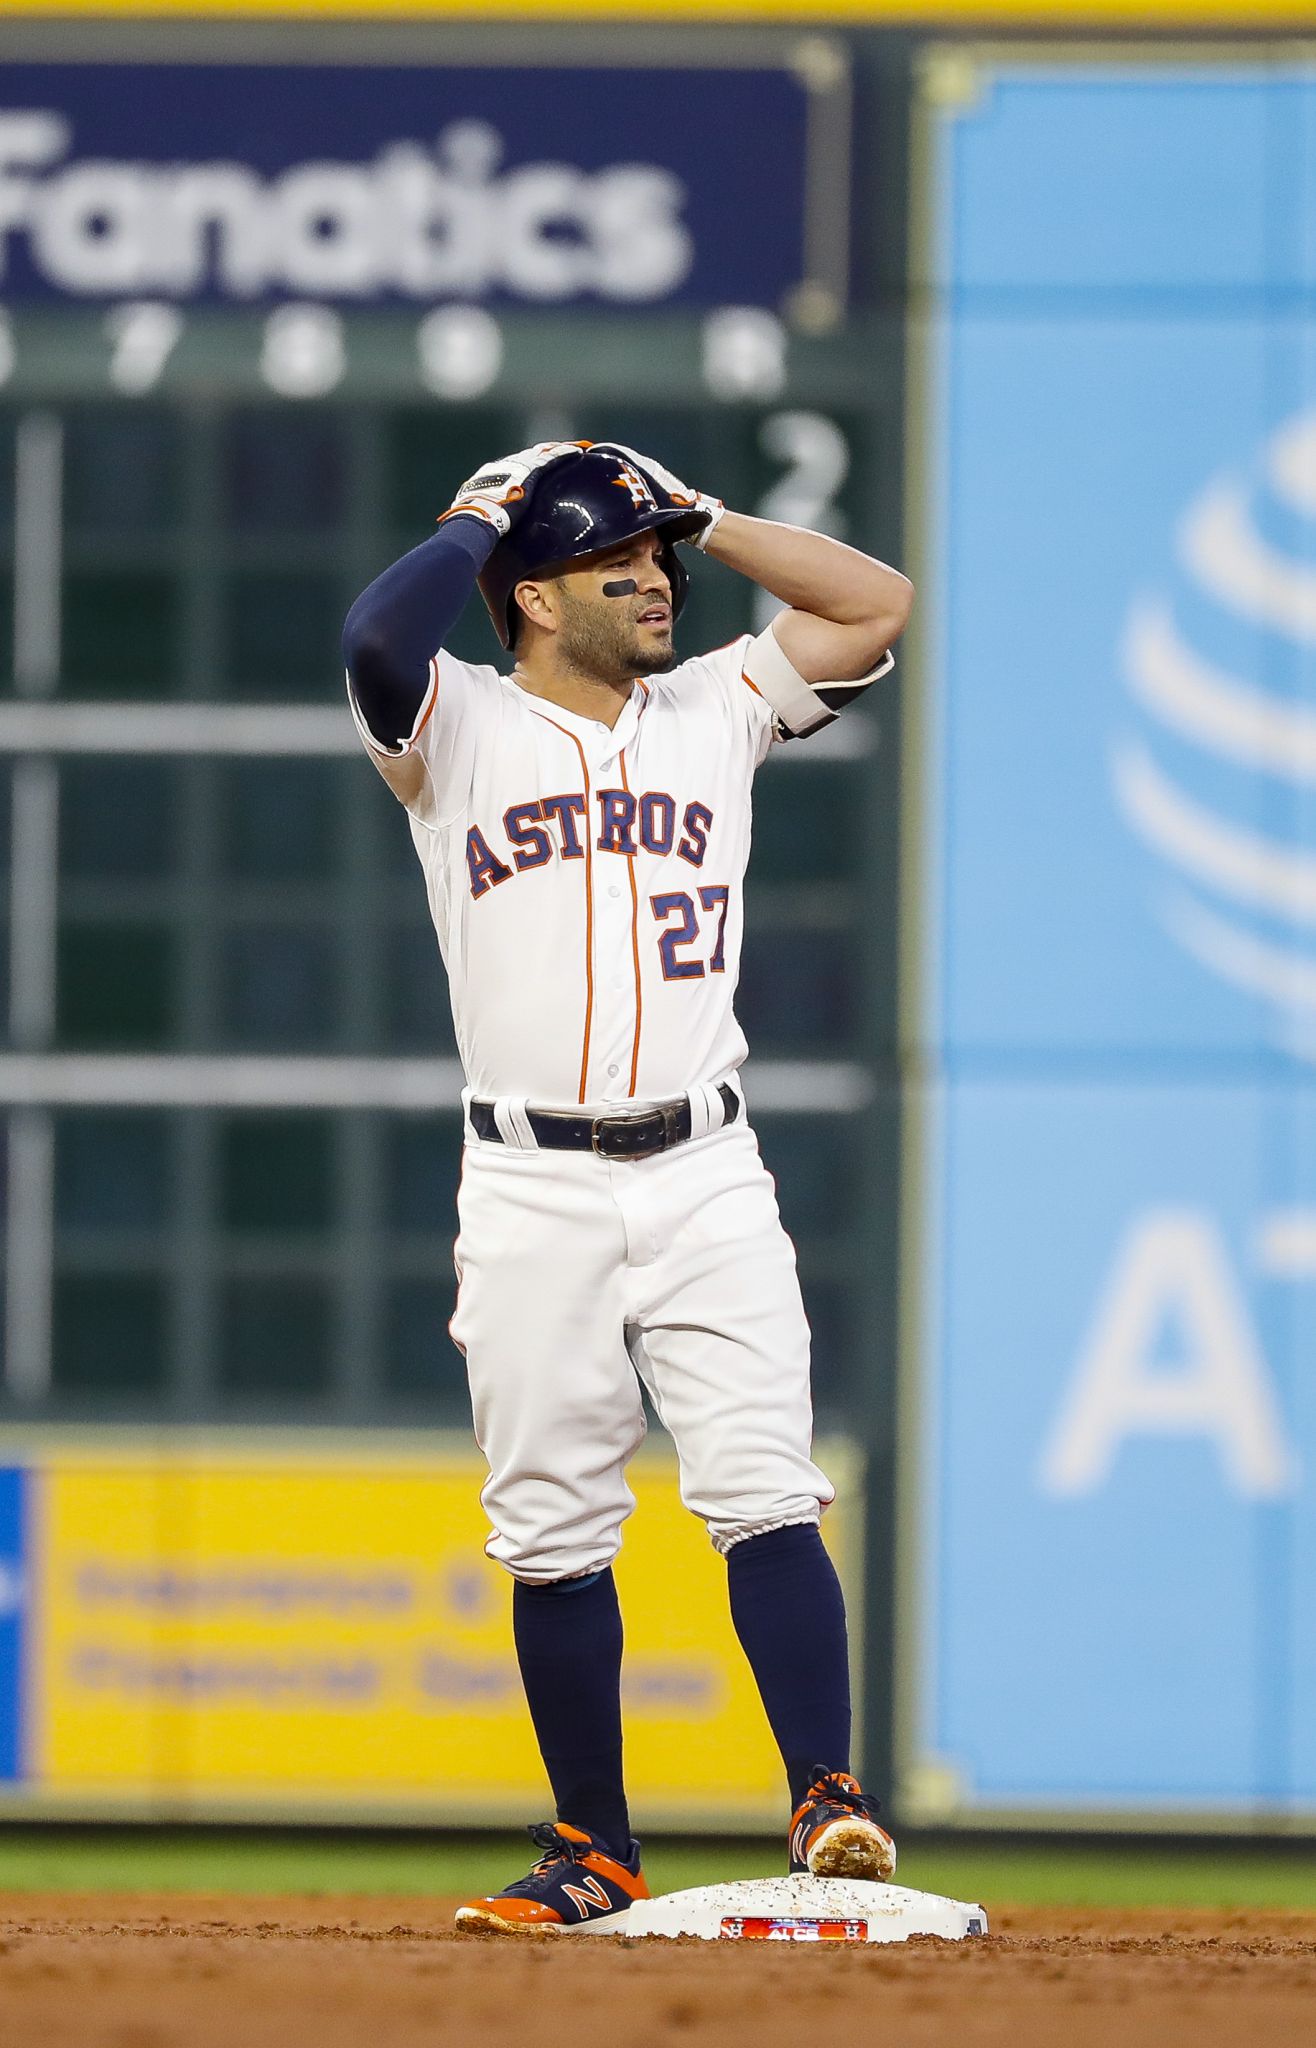 I didn't reach over the wall:' Astros fan denies committing interference on  overturned home run